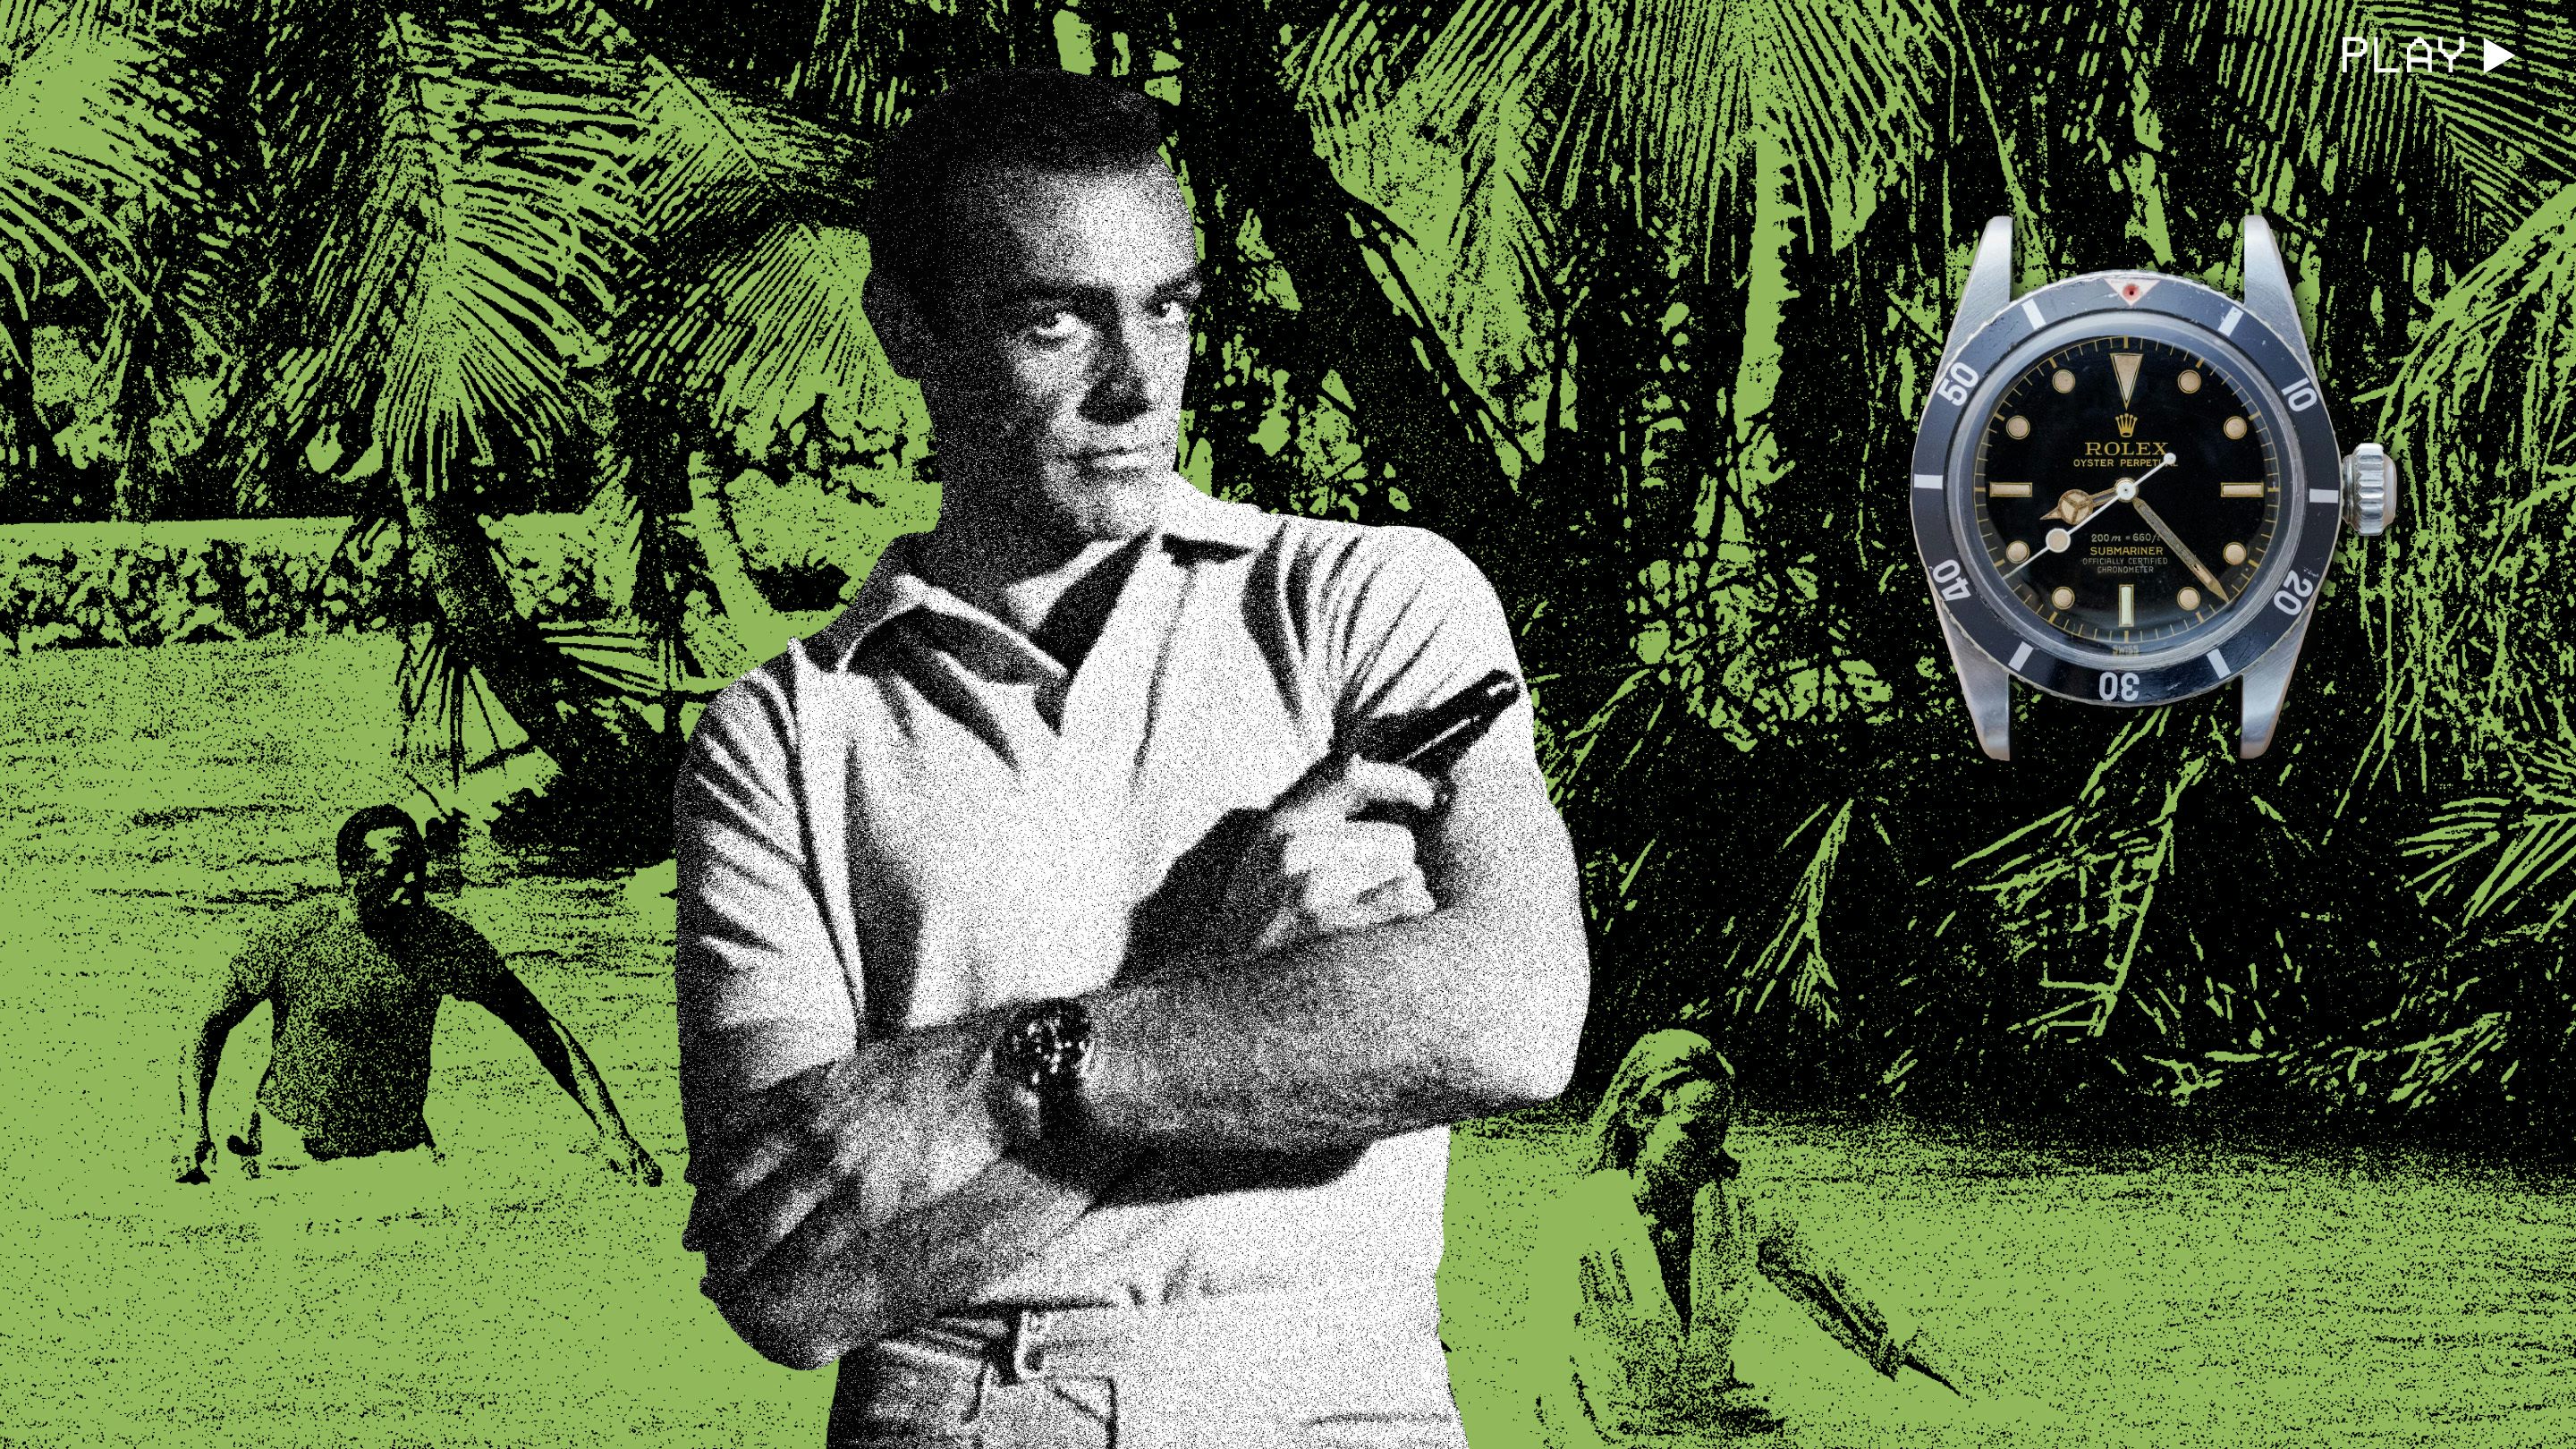 Lull hundrede liv What Watch Does James Bond Wear?